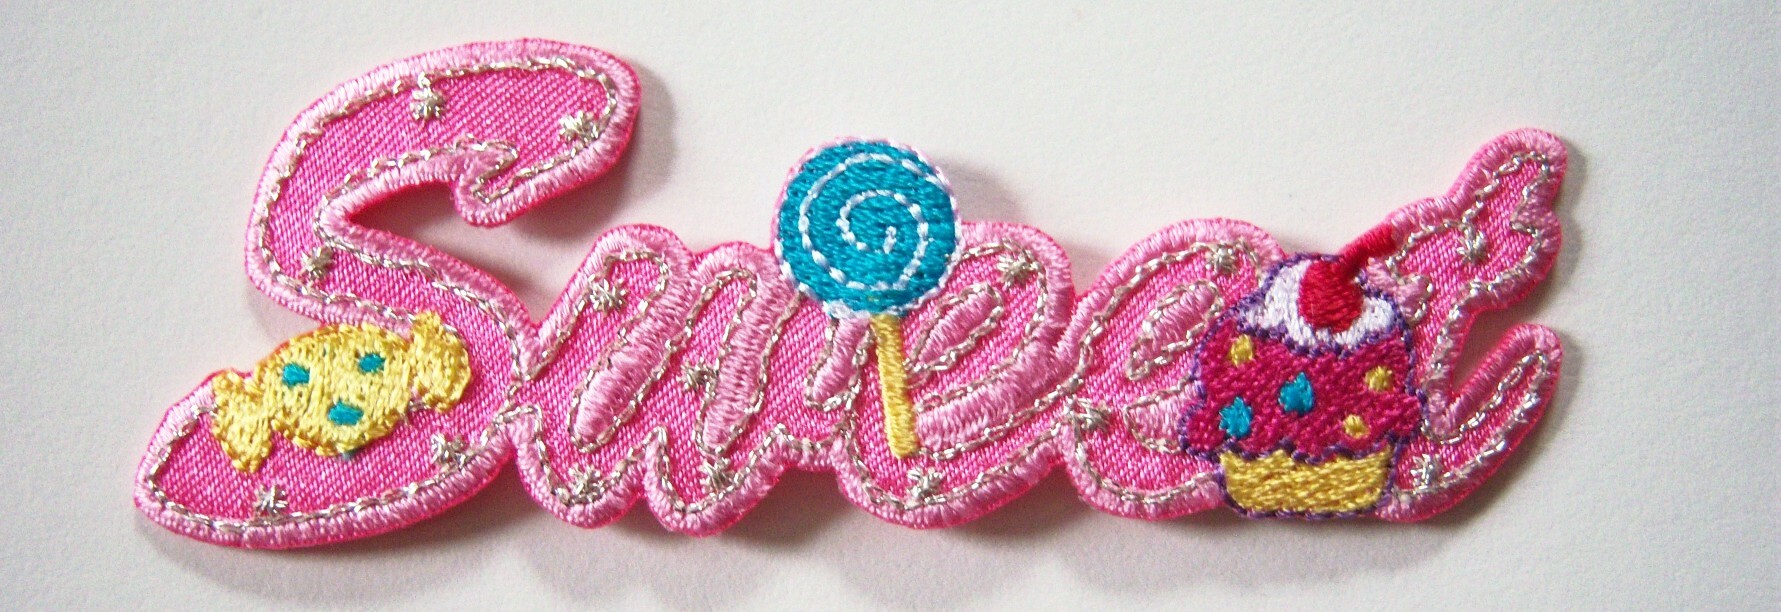 Pink/Silver Sweet Applique